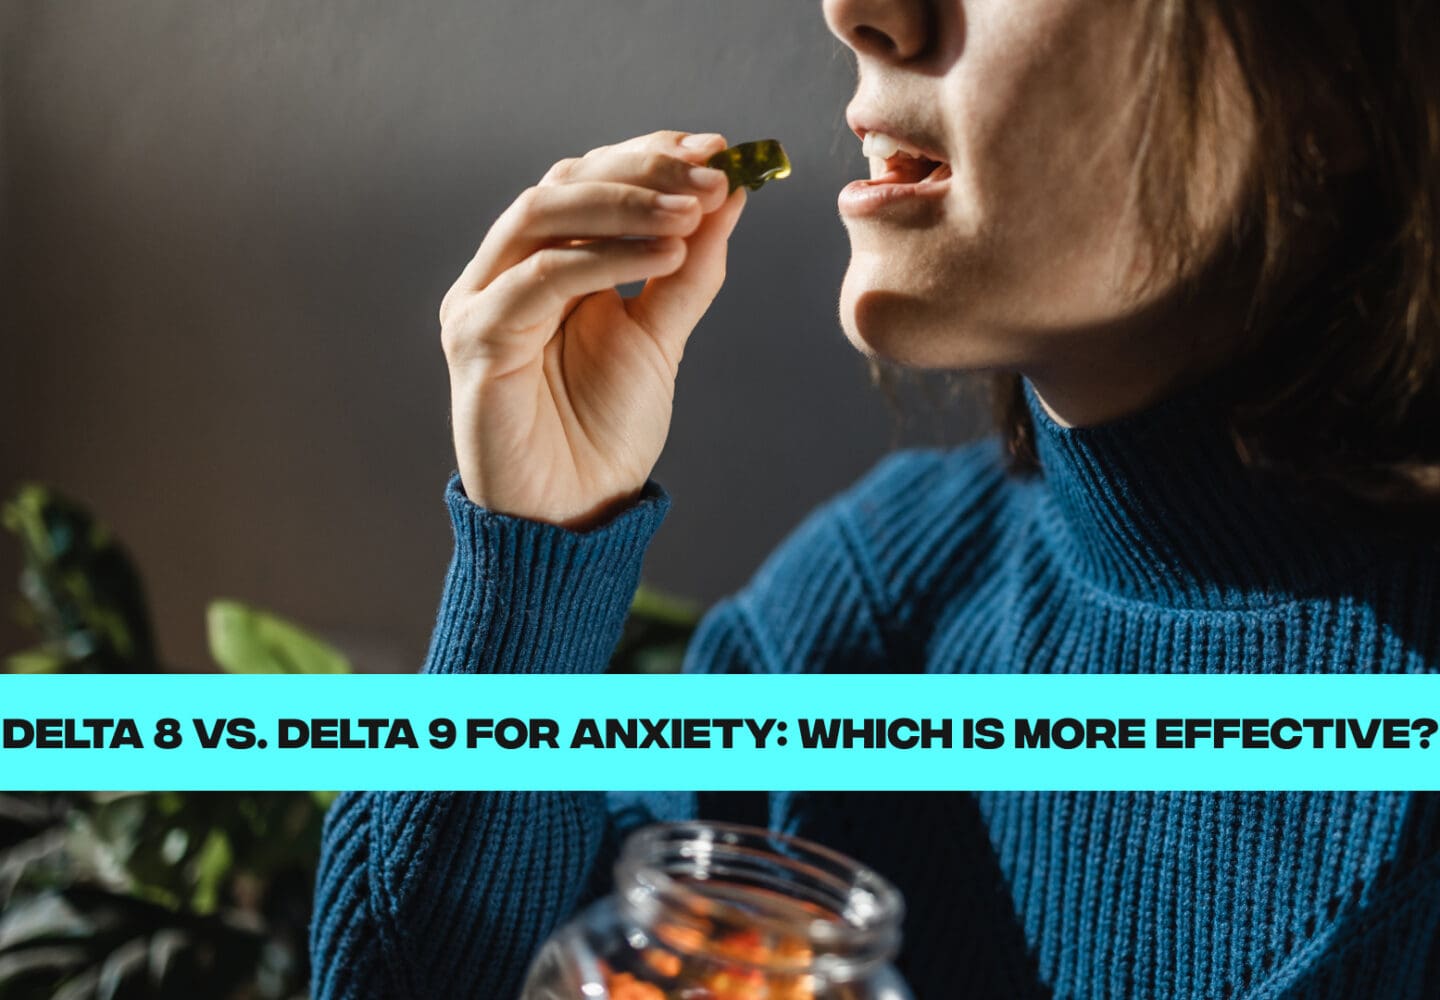 Delta 8 or Delta 9 for Anxiety